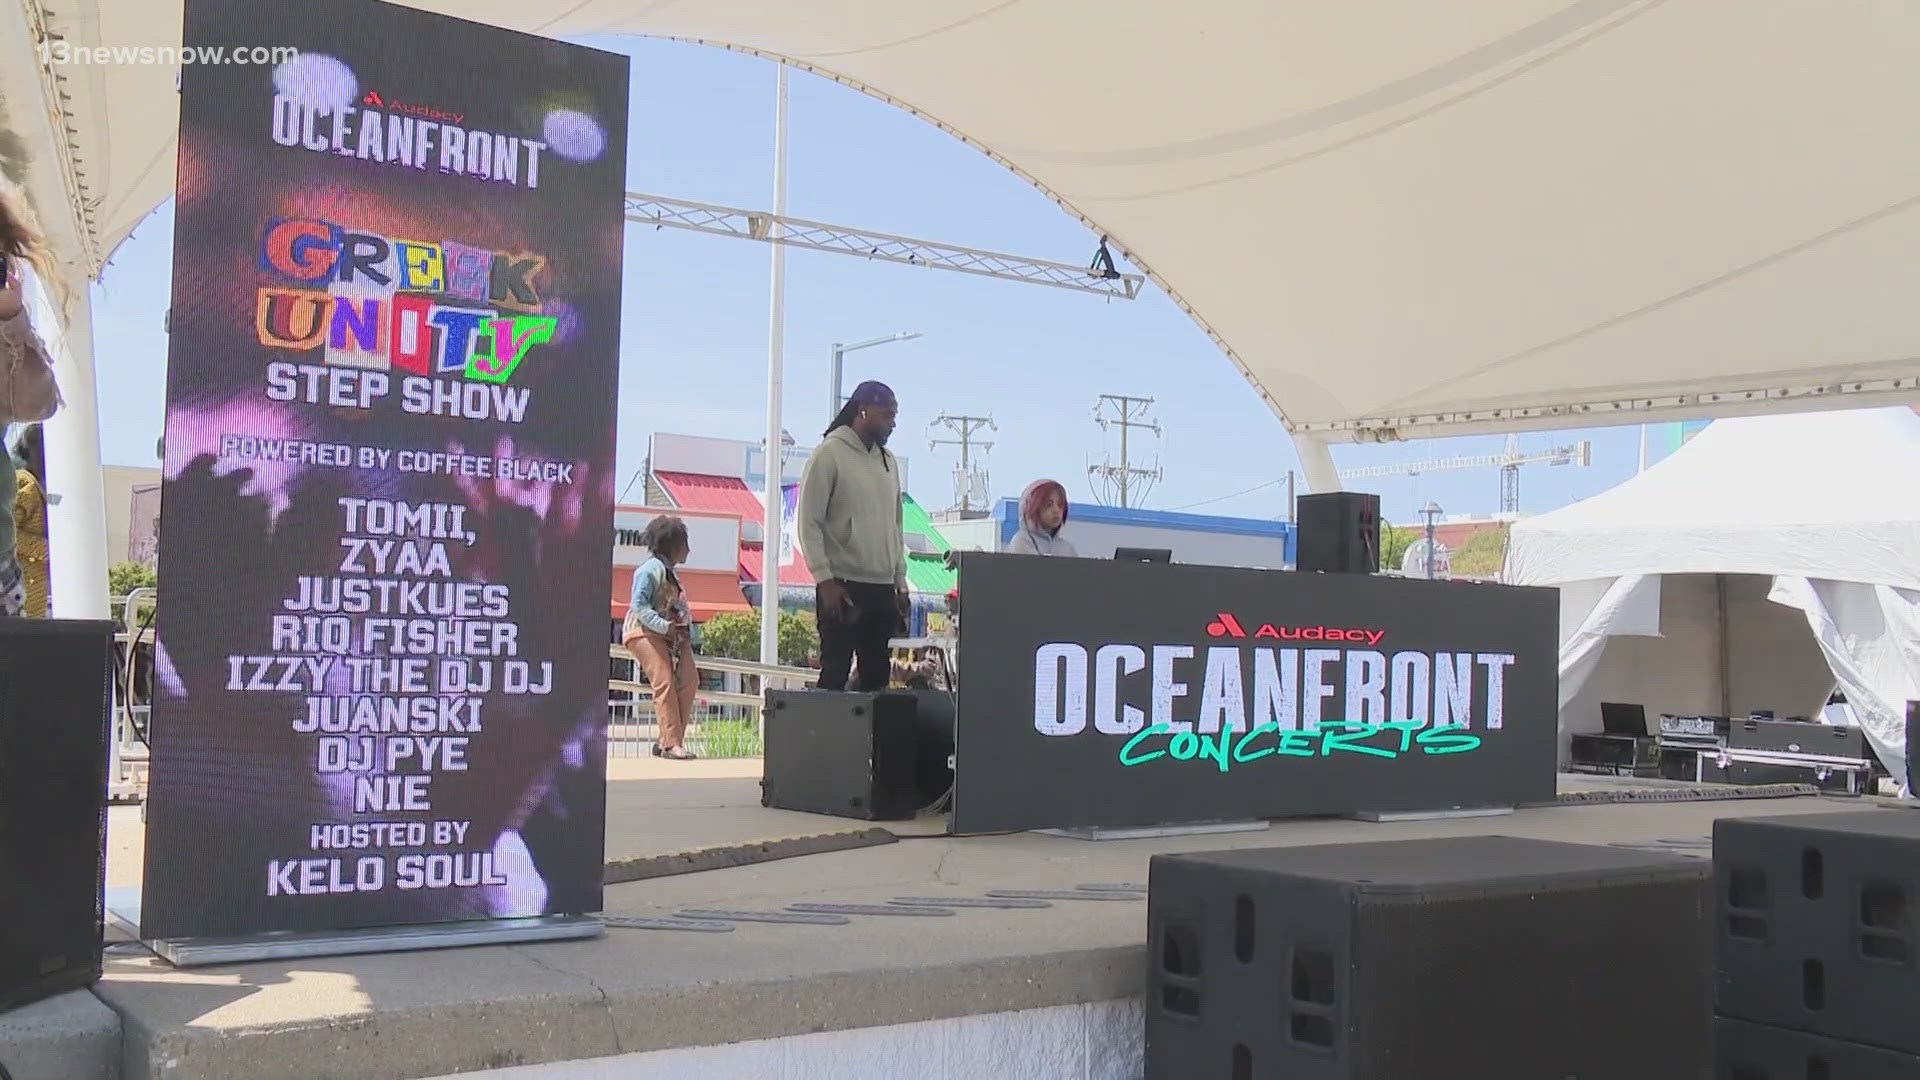 Crews spent hours setting up the main stage on the beach next to Neptune's Park, where famous artists like Juicy J and NLE Chopper will perform.